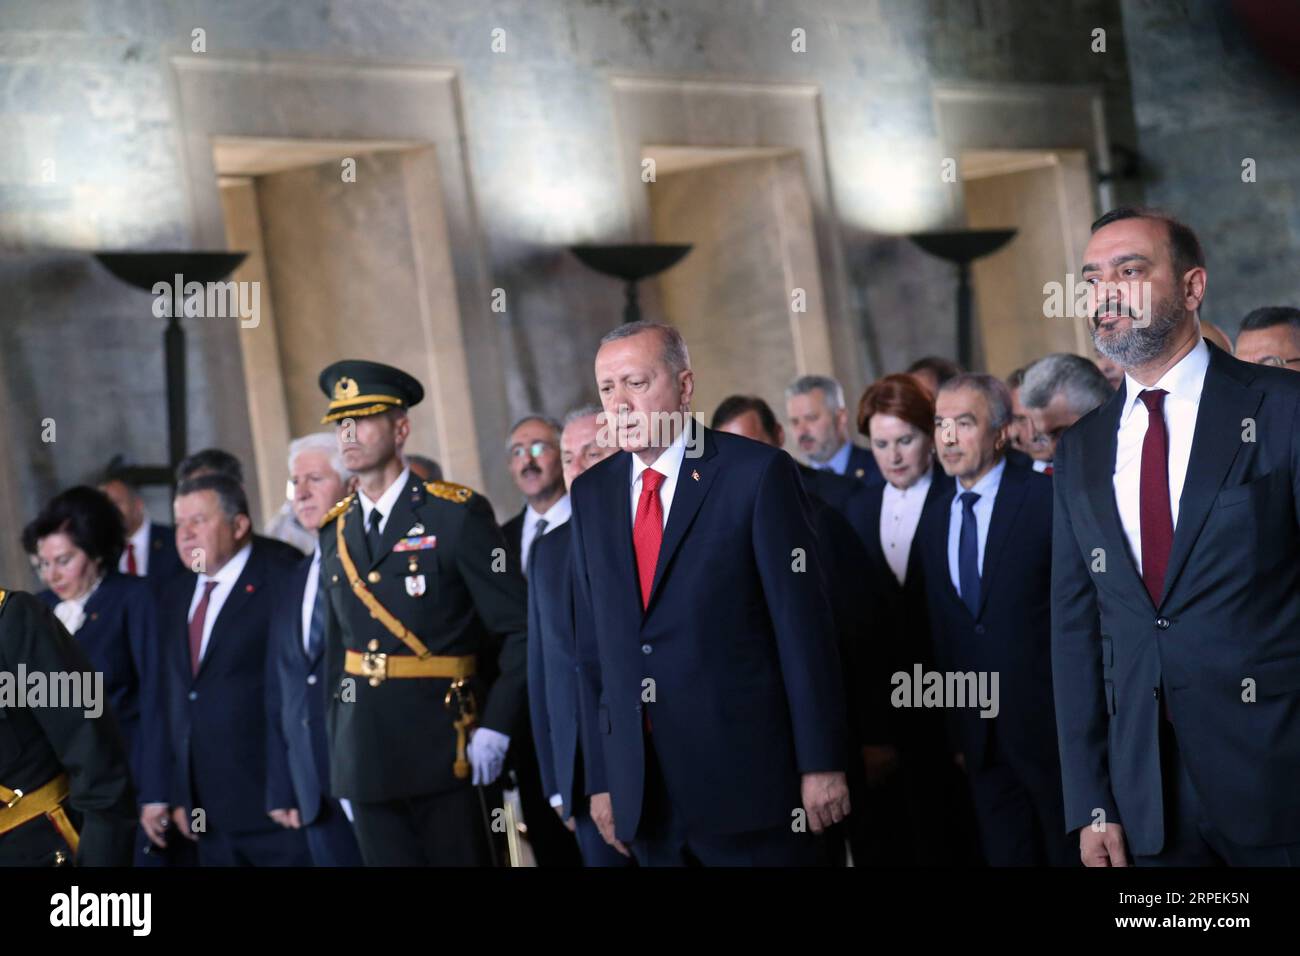 (190830) -- ANKARA, Aug. 30, 2019 -- Turkish President Recep Tayyip Erdogan pays tribute to Mustafa Kemal Ataturk, founder of the Republic of Turkey, at a ceremony held in the Ataturk Mausoleum in the capital Ankara, Turkey, Aug. 30, 2019. Turkey marked on Friday the 97th anniversary of Victory Day, the day the Turks defeated the Greek forces at the Battle of Dumlupinar, the final battle of the Turkish War of Independence in 1922. (Photo by /Xinhua) TURKEY-ANKARA-VICTORY DAY MustafaxKaya PUBLICATIONxNOTxINxCHN Stock Photo